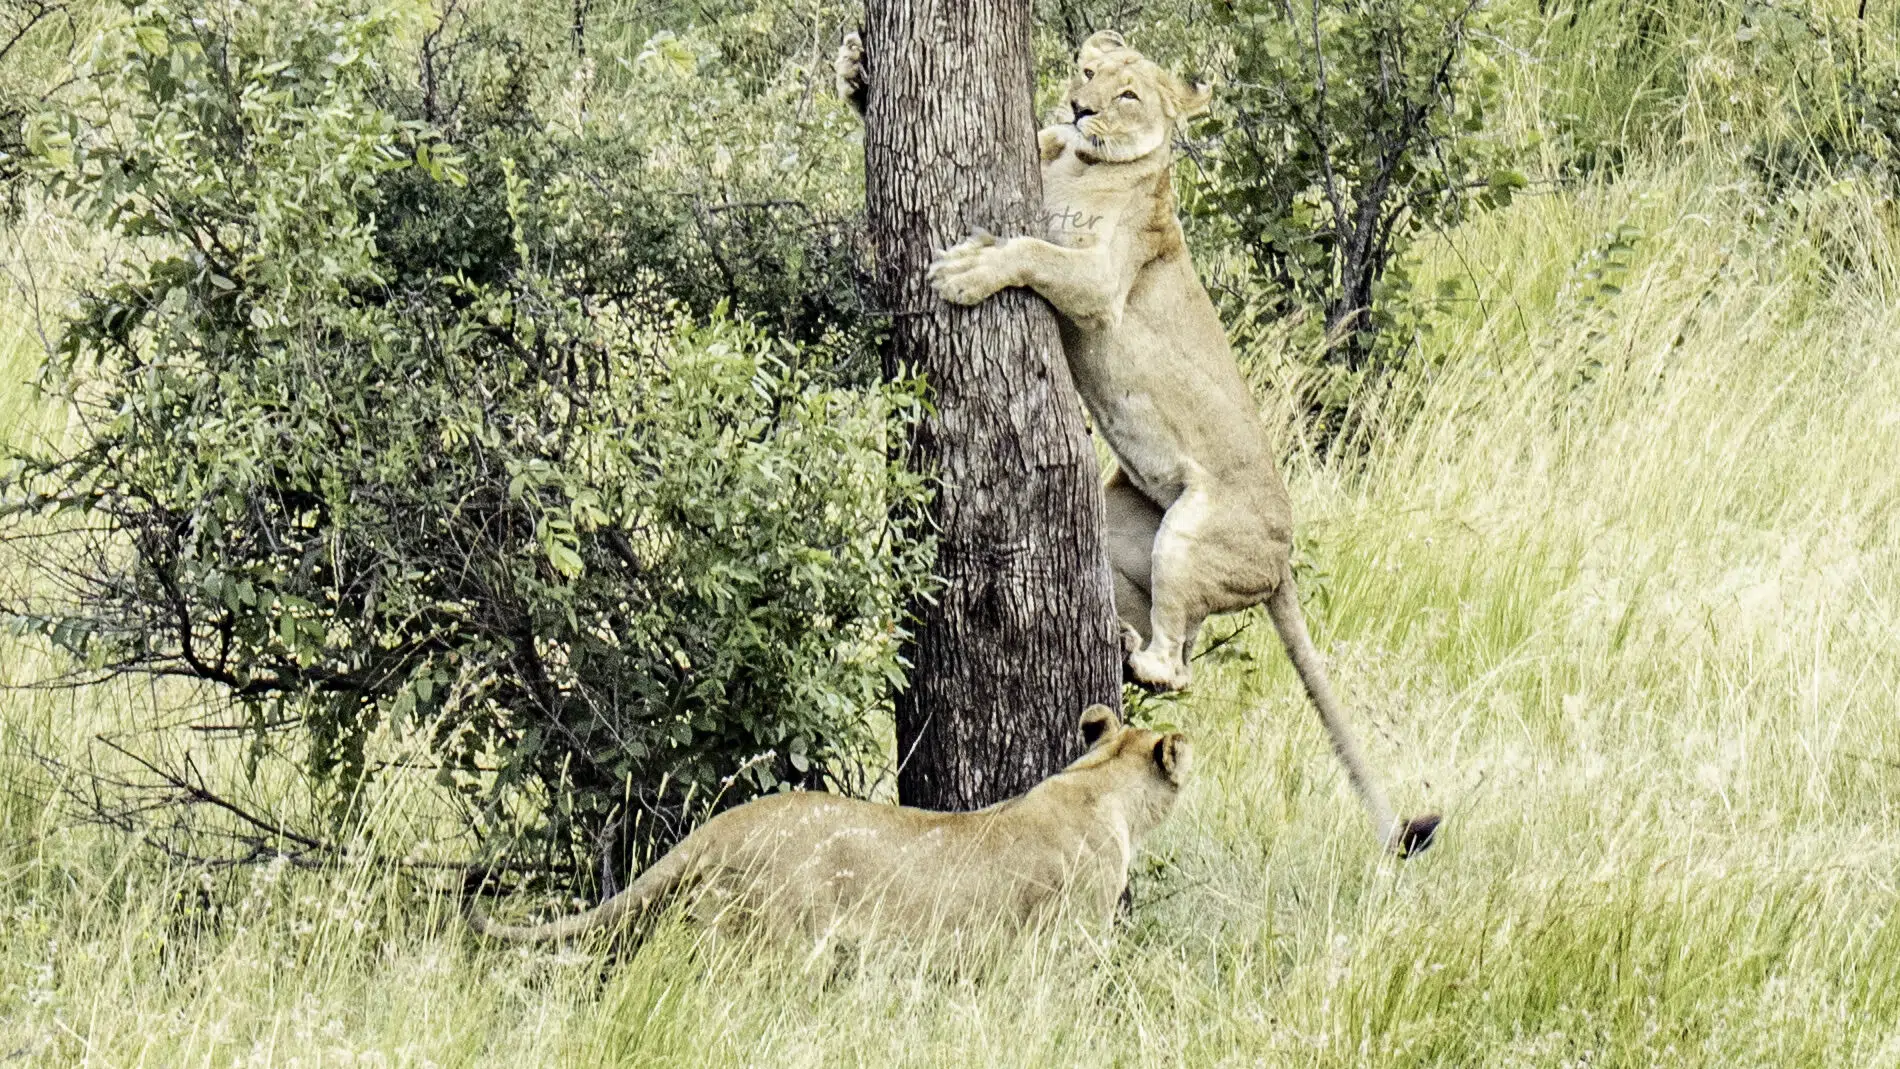 Lions try to chase after leopard